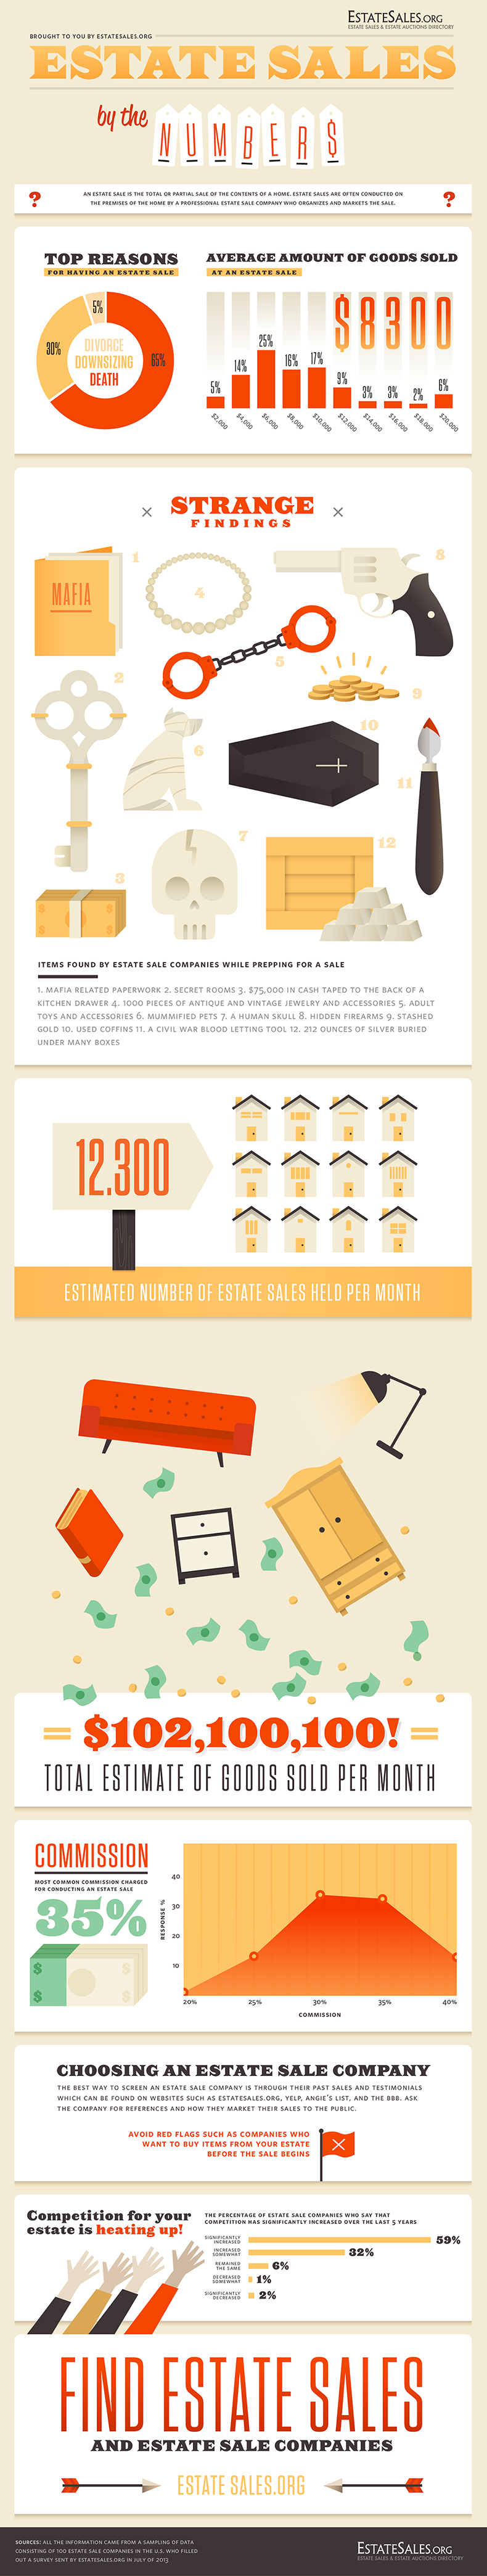 Estate Sales By The Numbers Infographic